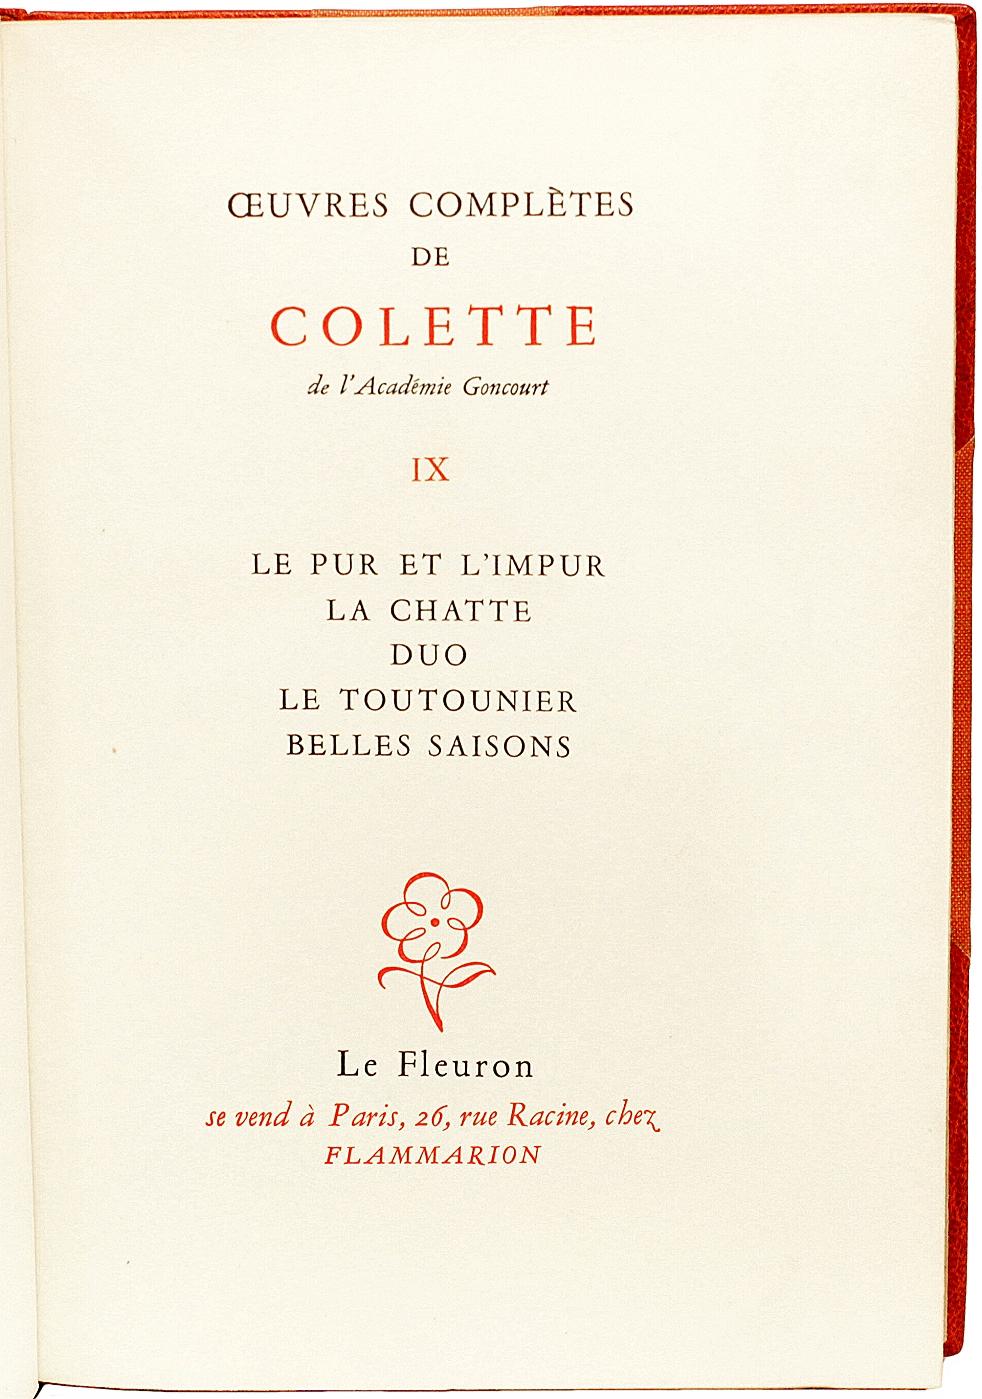 French Oeuvres Completes De Colette. Complete Works of Colette - FIRST COLLECTED EDITON For Sale